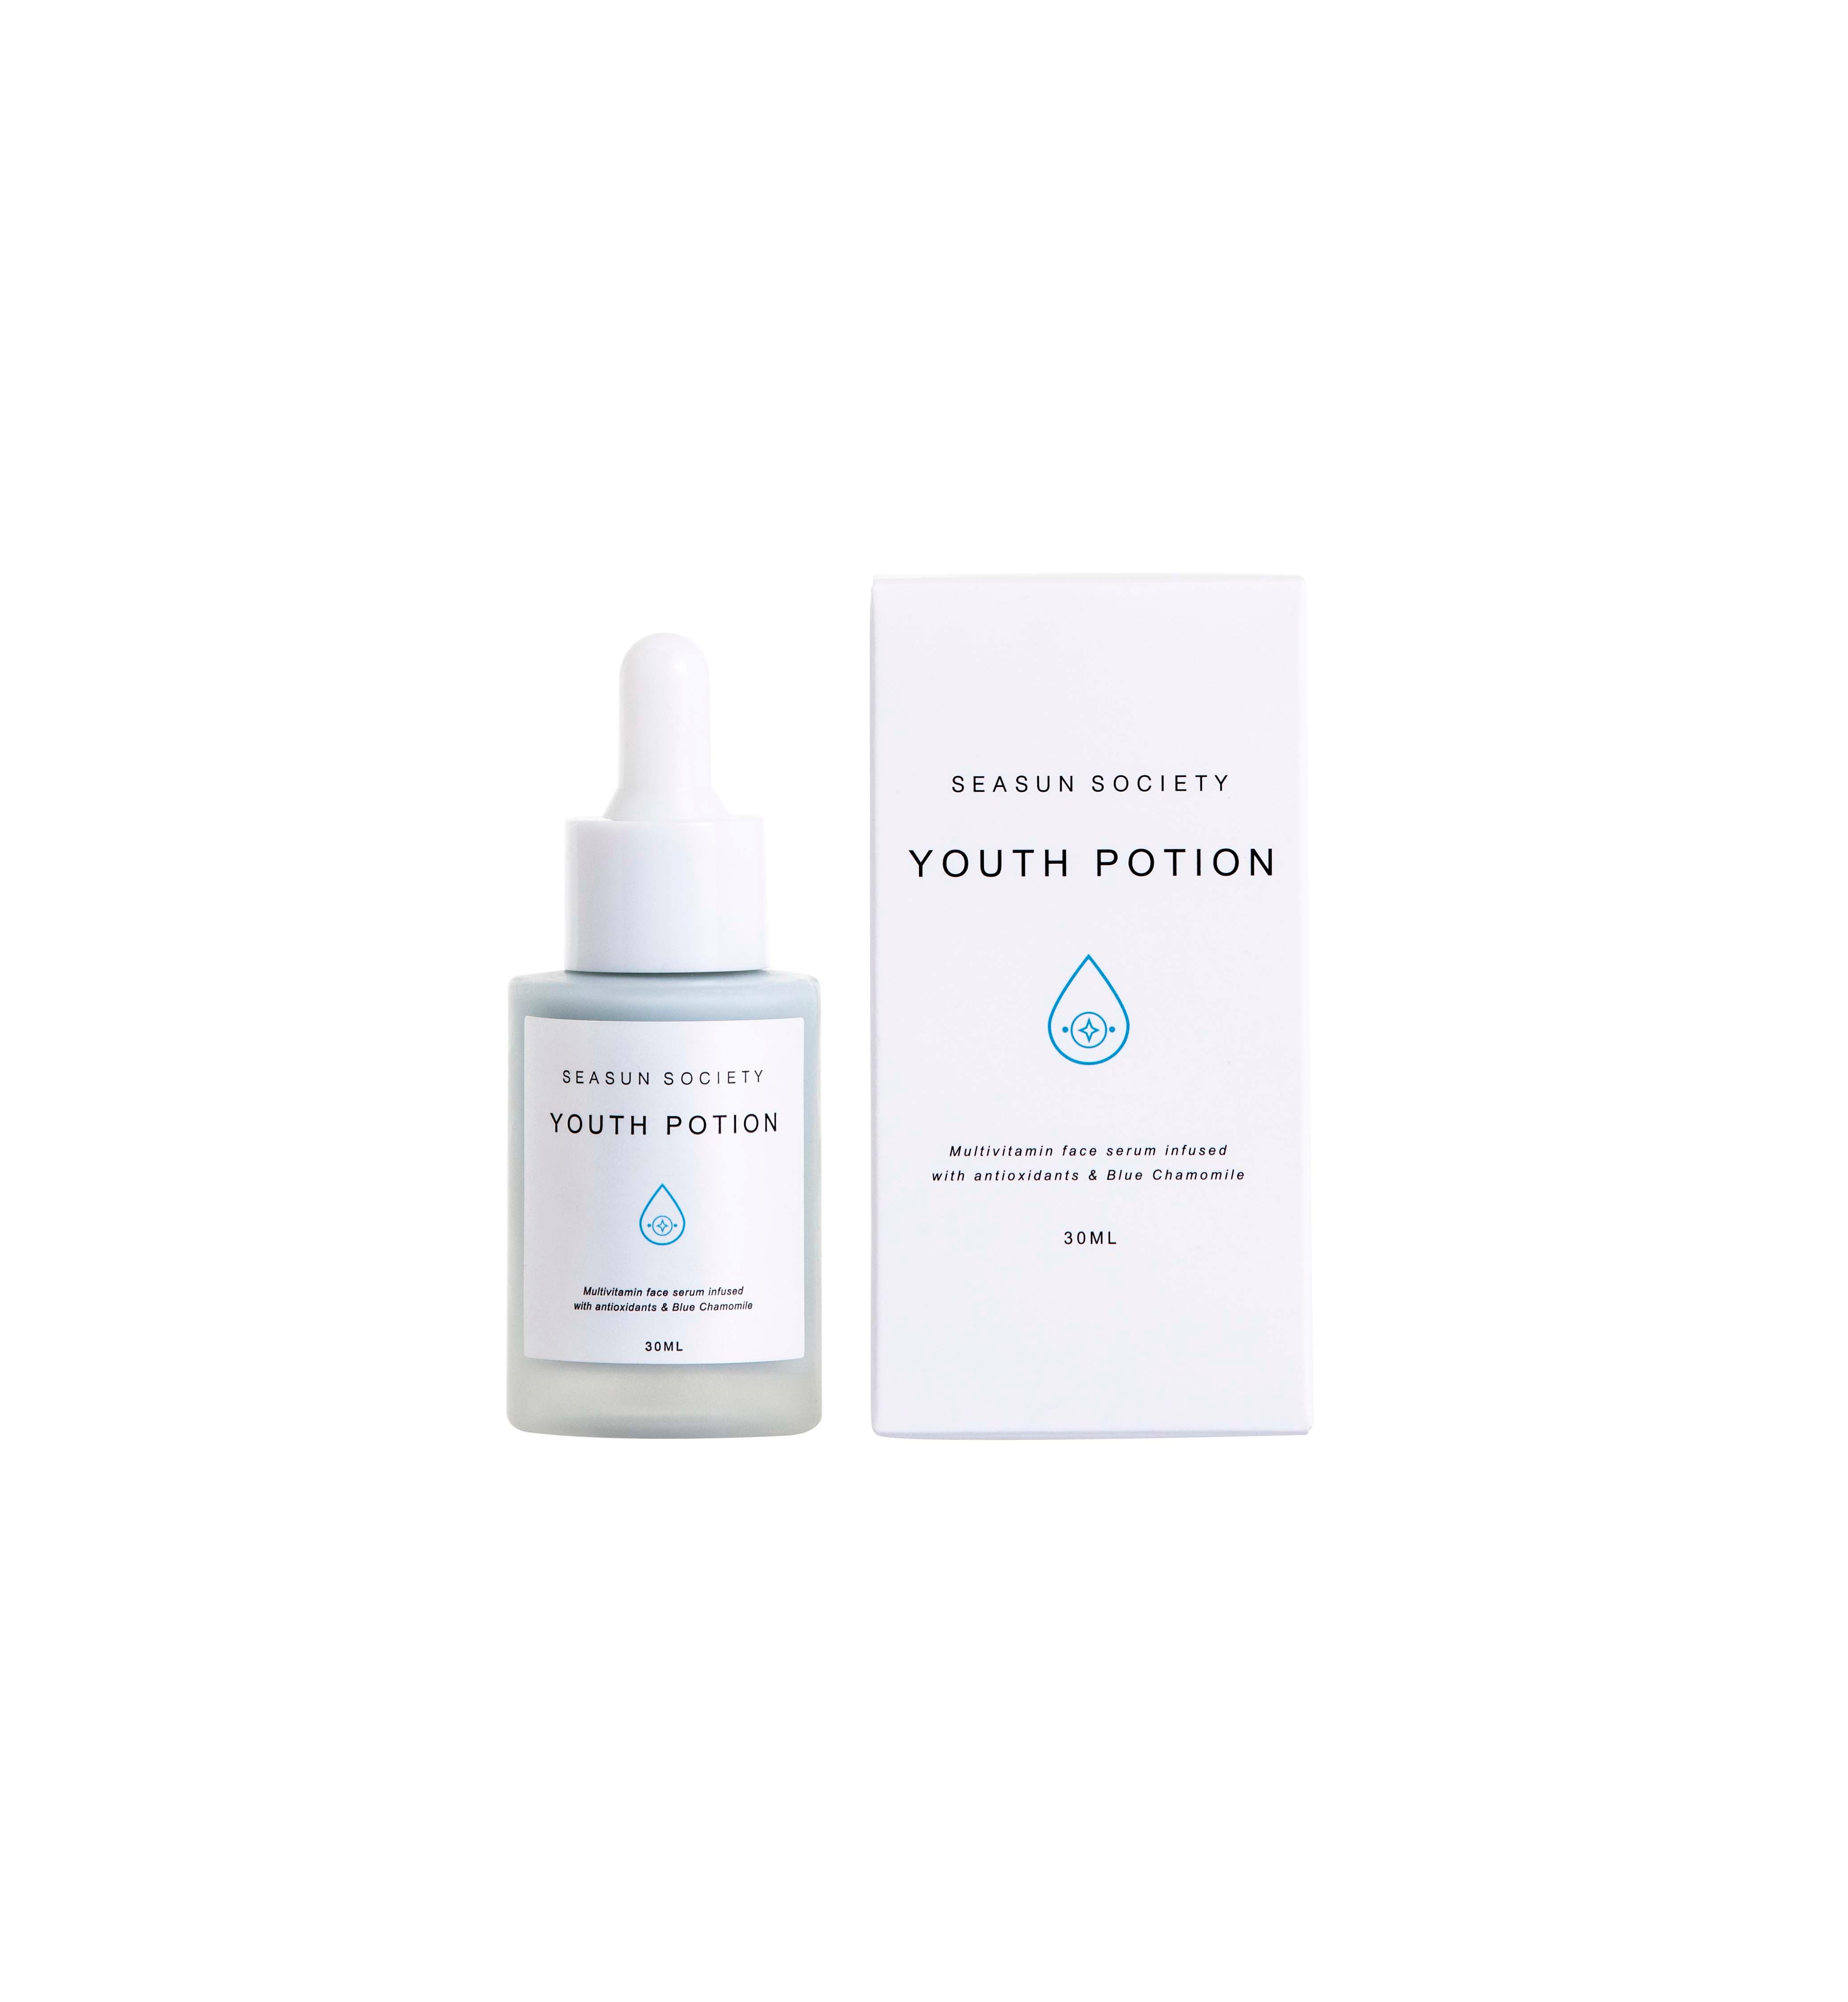 Clean Plant Based Face Duo Kit with Blue Spell Facial Oil & Youth Potion Multivitamin Face Serum by Seasun Society